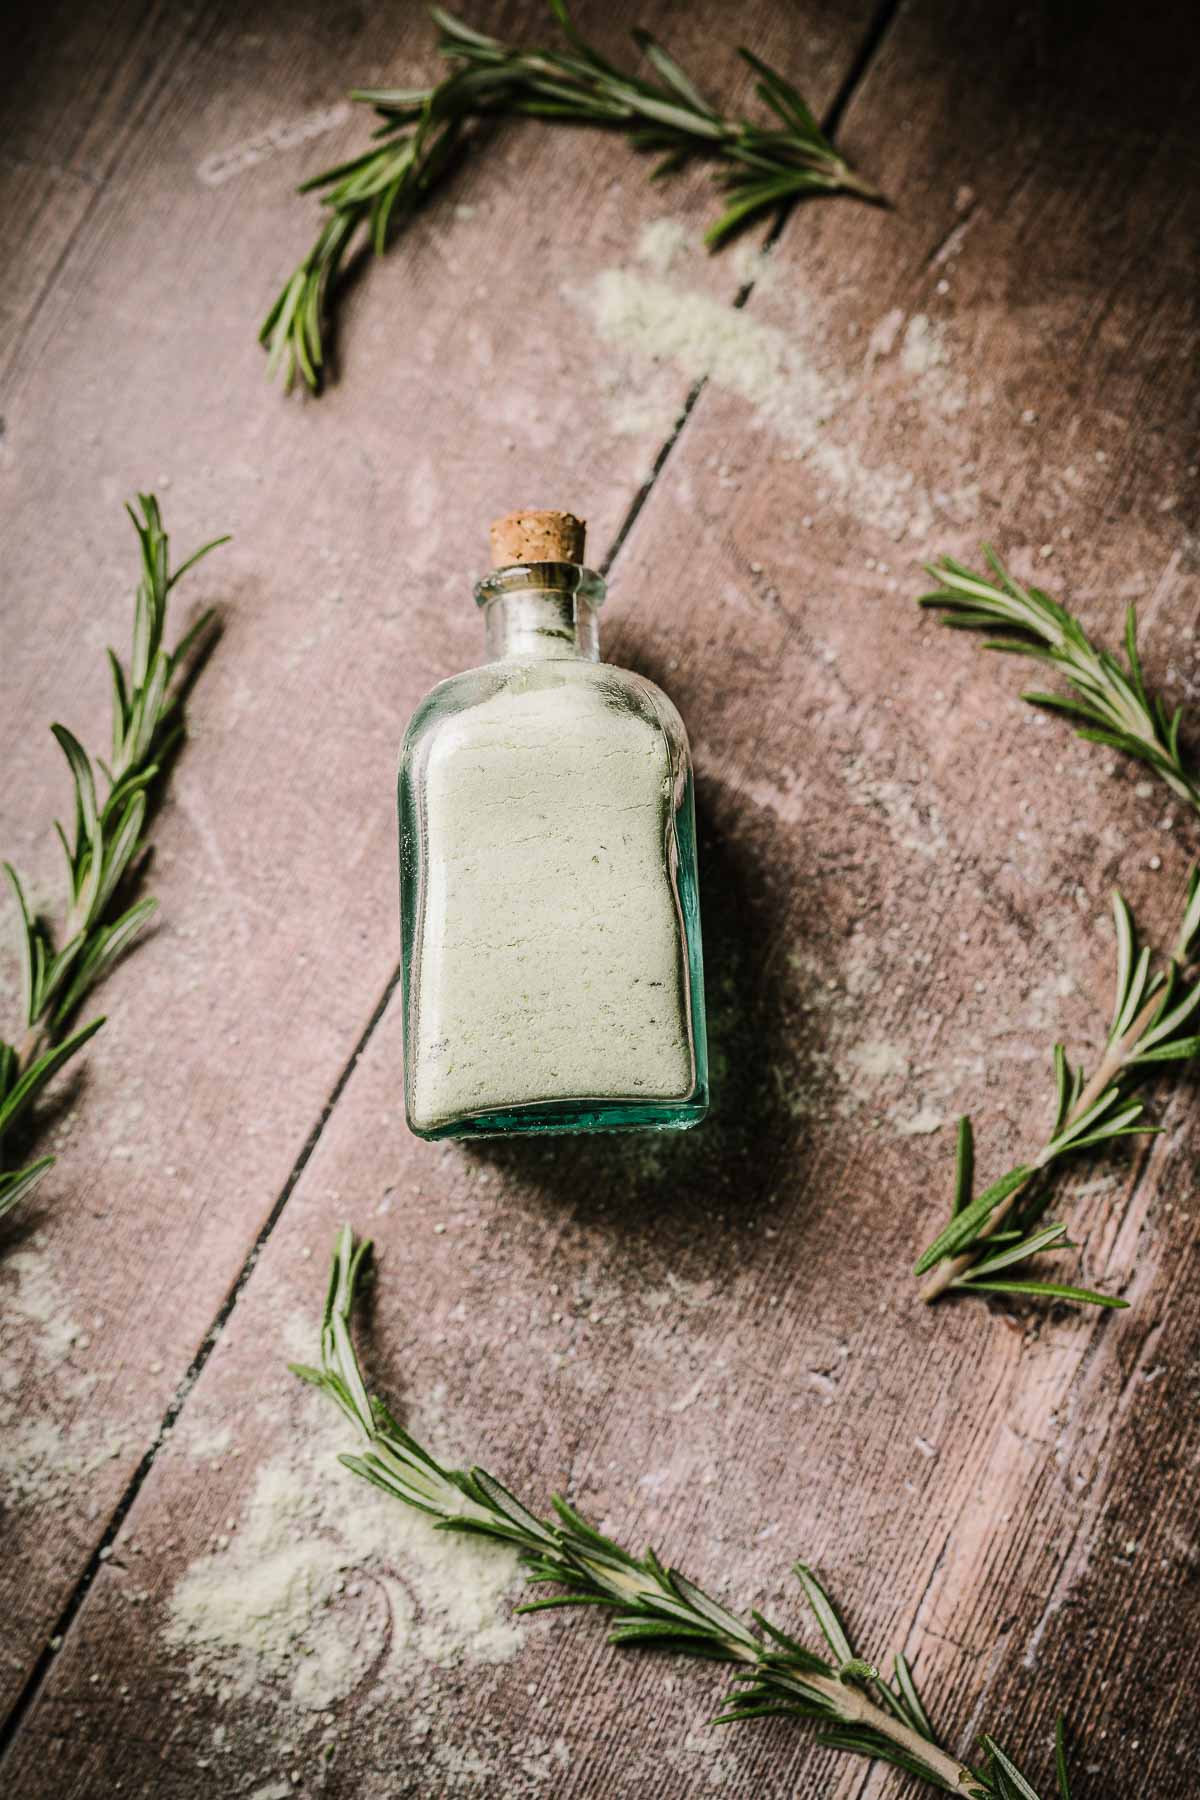 A corked glass bottle filled with light green salt resting on a wooden table scattered with rosemary sprigs.